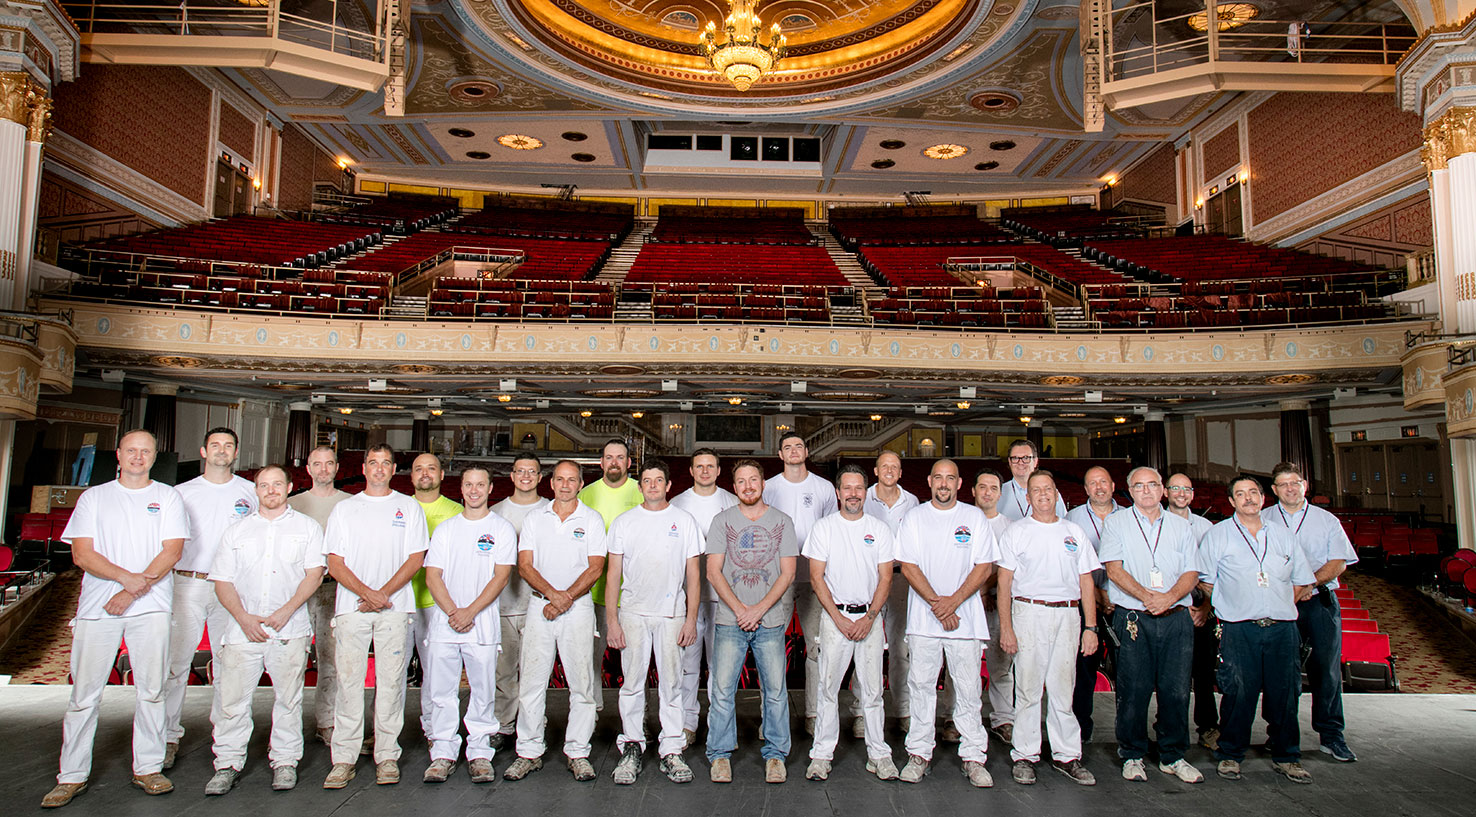 The State Theatre restoration was a collaborative effort of EverGreene Architectural Arts of New York and The Dependable Painting Company of Cleveland. Paint crews of the two firms pose on the stage with the Playhouse Square facilities staff